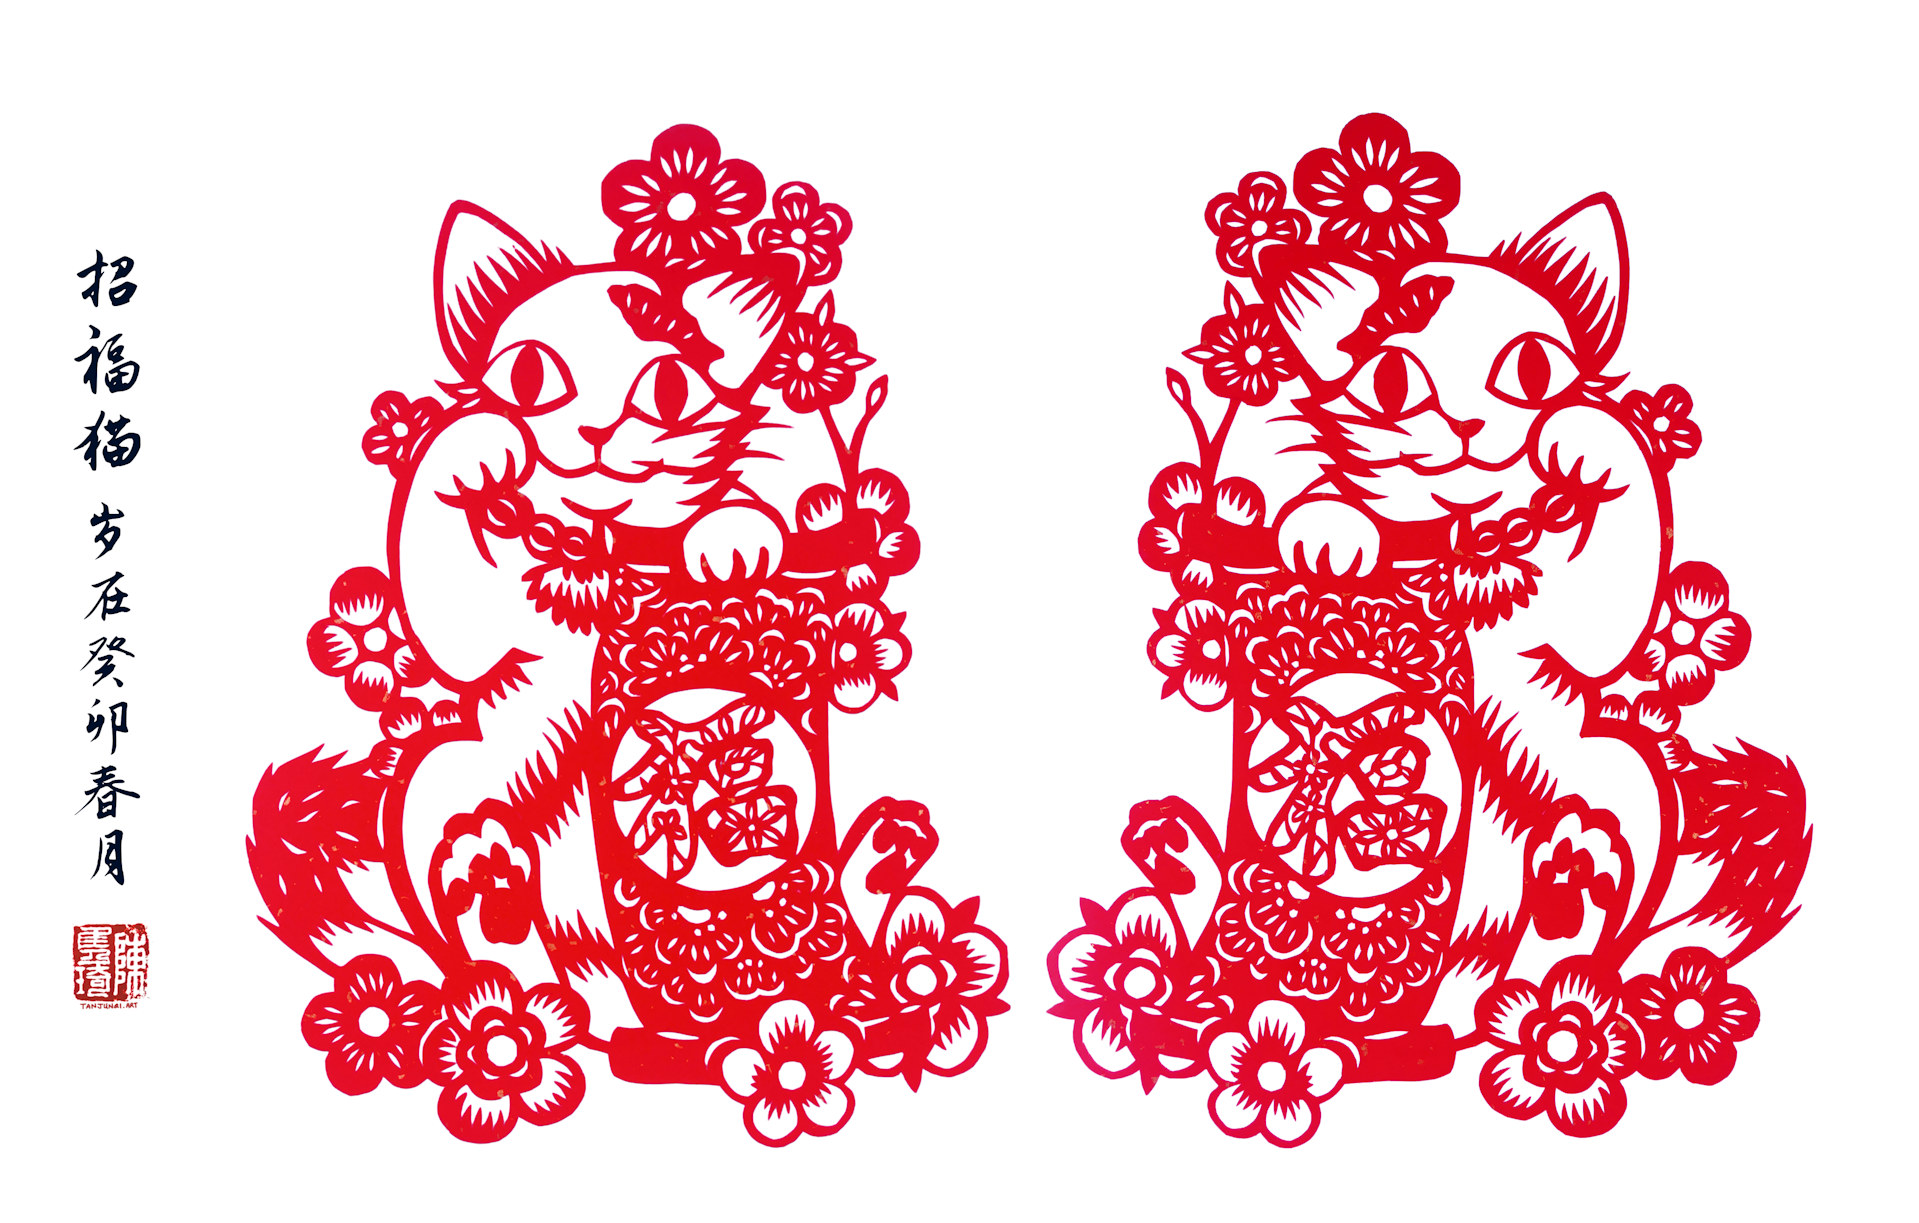 A pair of Chinese papercuts of white fortune beckoning cats with a dark spot on their foreheads. They are surrounded with cherry blossoms and are holding a scroll with the Chinese word for 'prosperity'